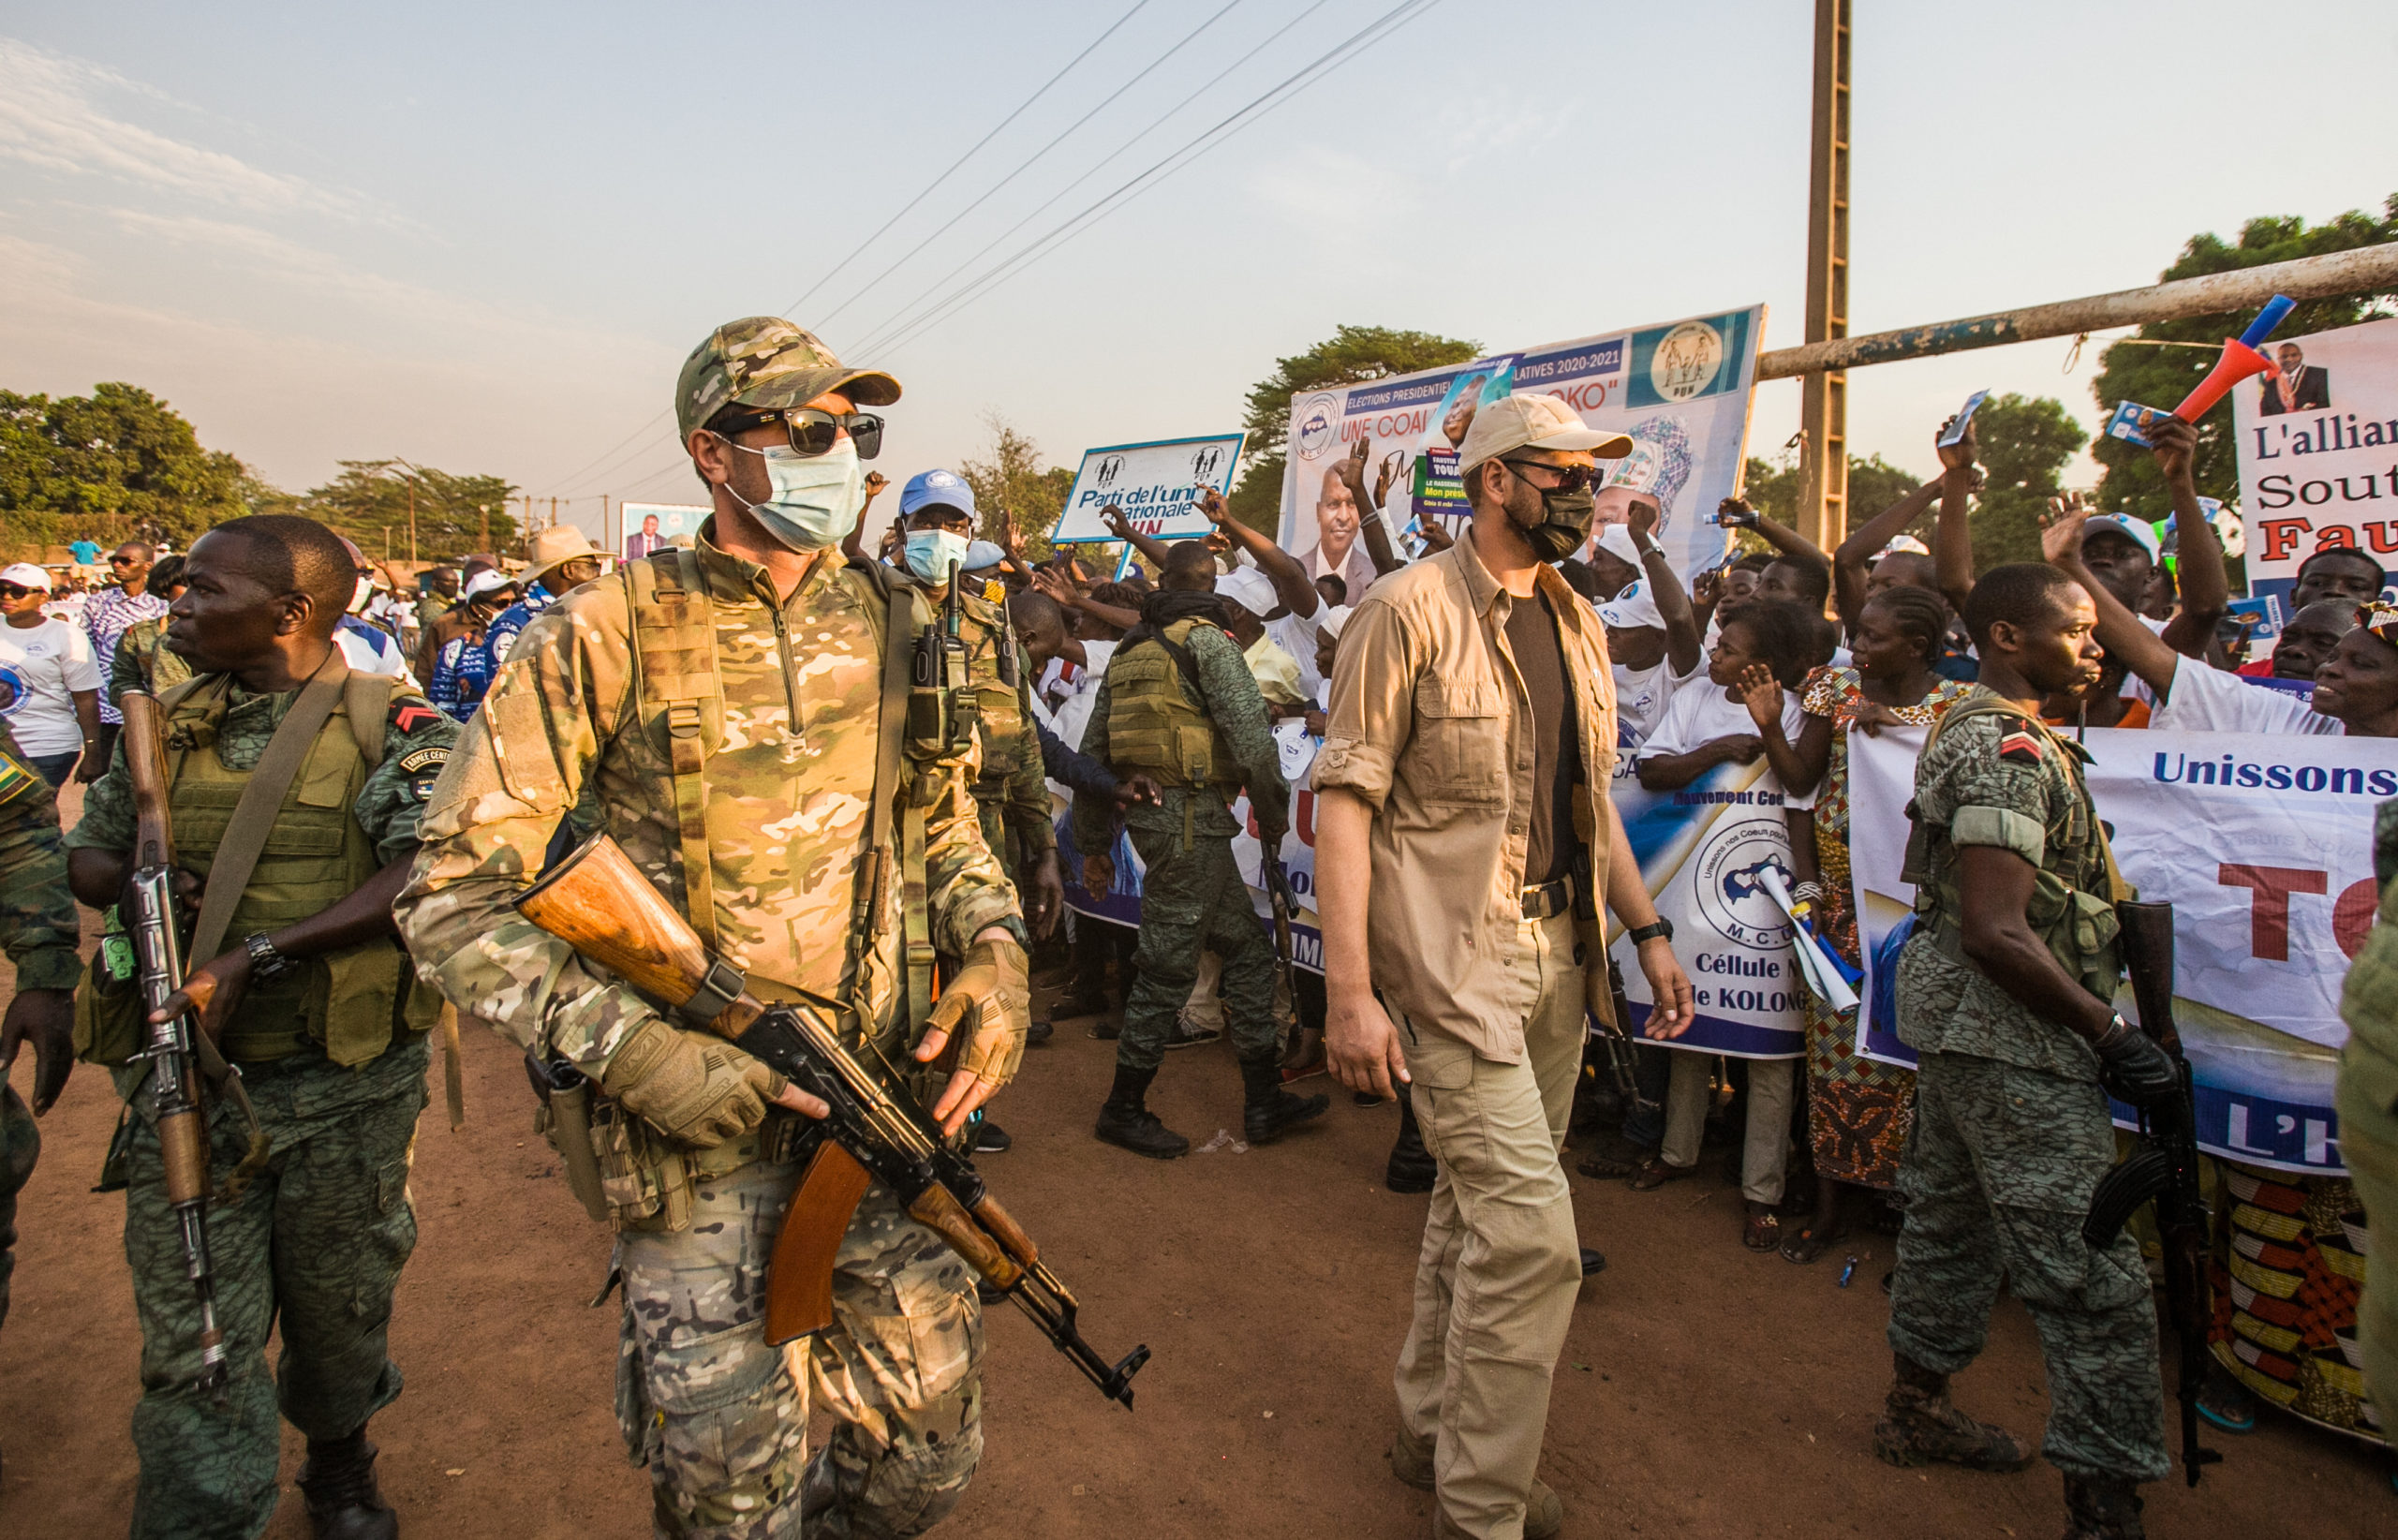 ANALYSIS: Wagner's actions in CAR reflect Russia's increasing military presence in Africa